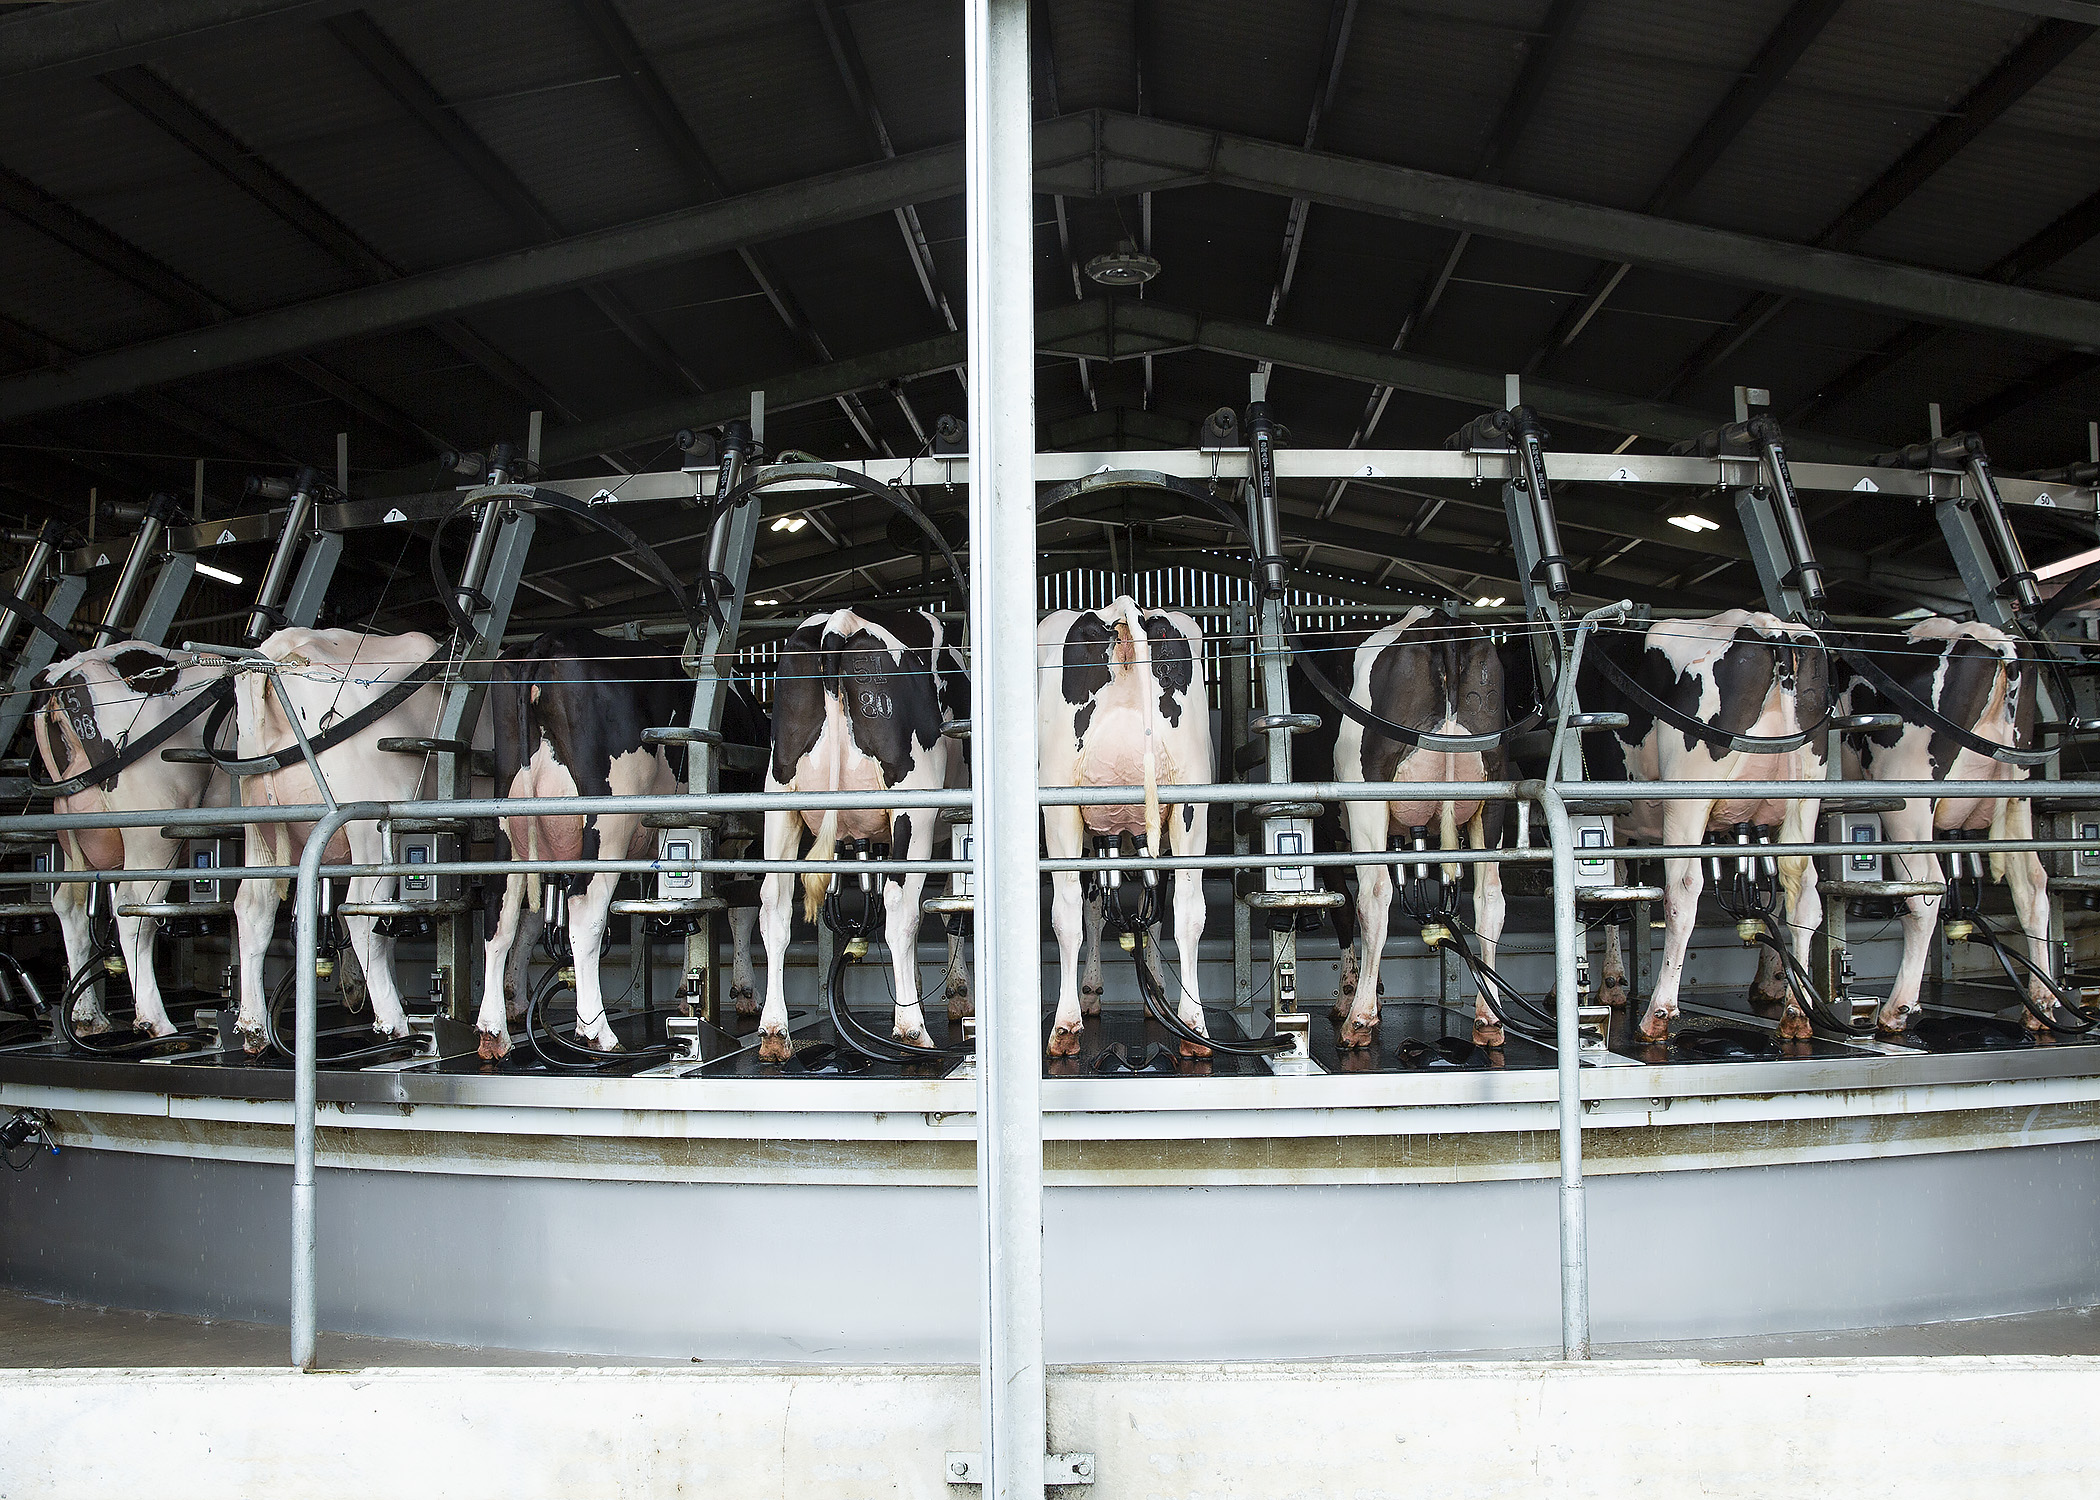 Getting supplementation right improves dairy efficiency, performance and profitability